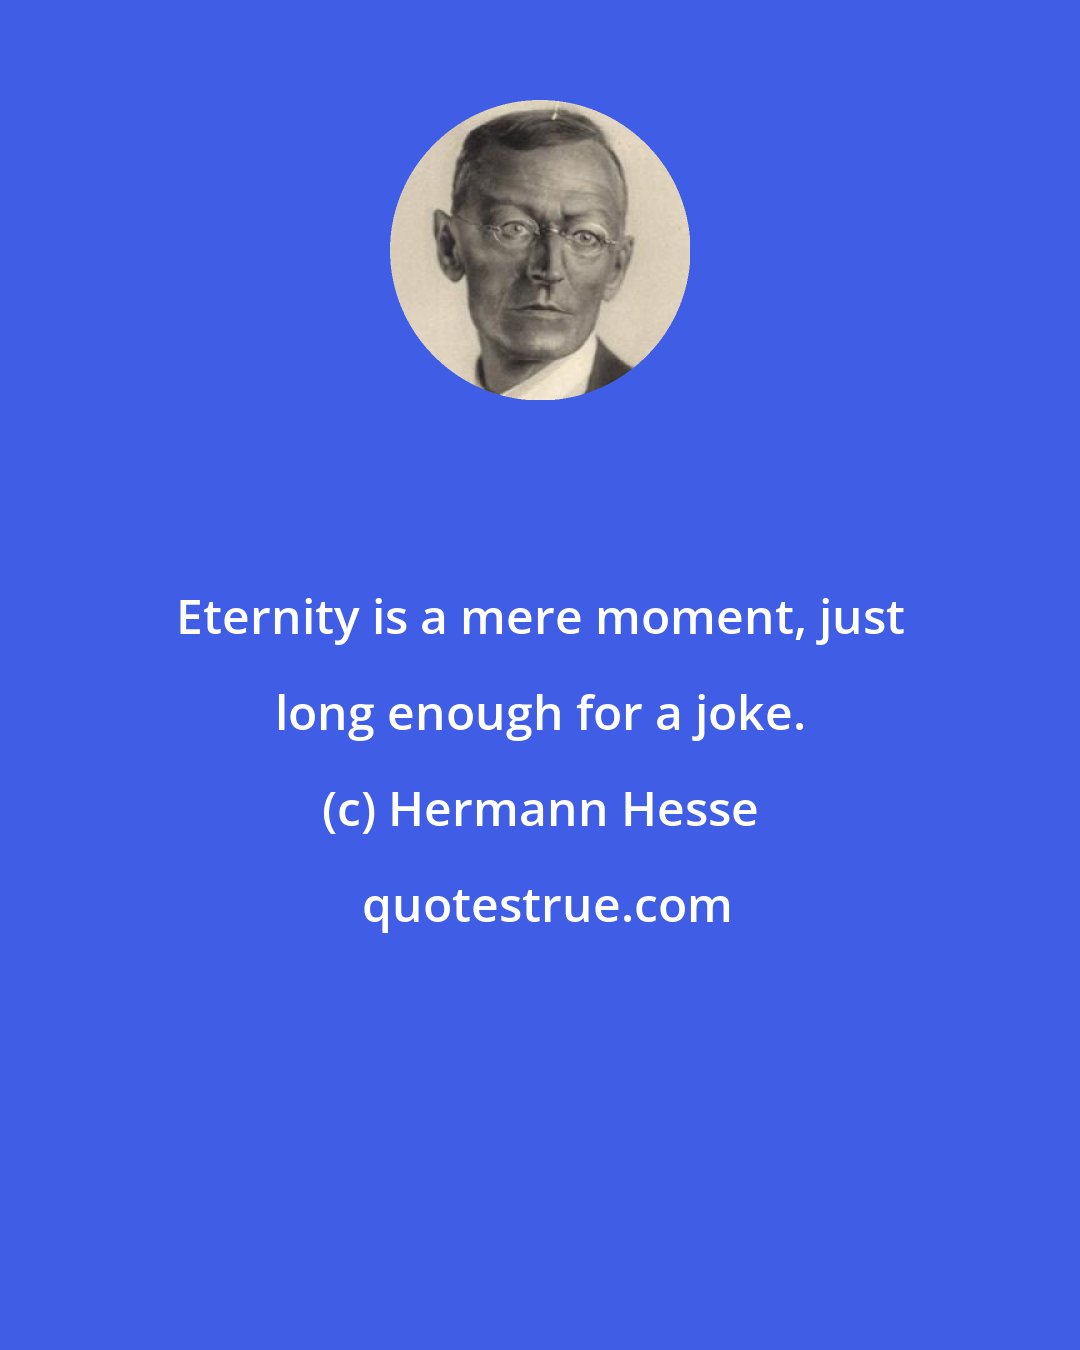 Hermann Hesse: Eternity is a mere moment, just long enough for a joke.